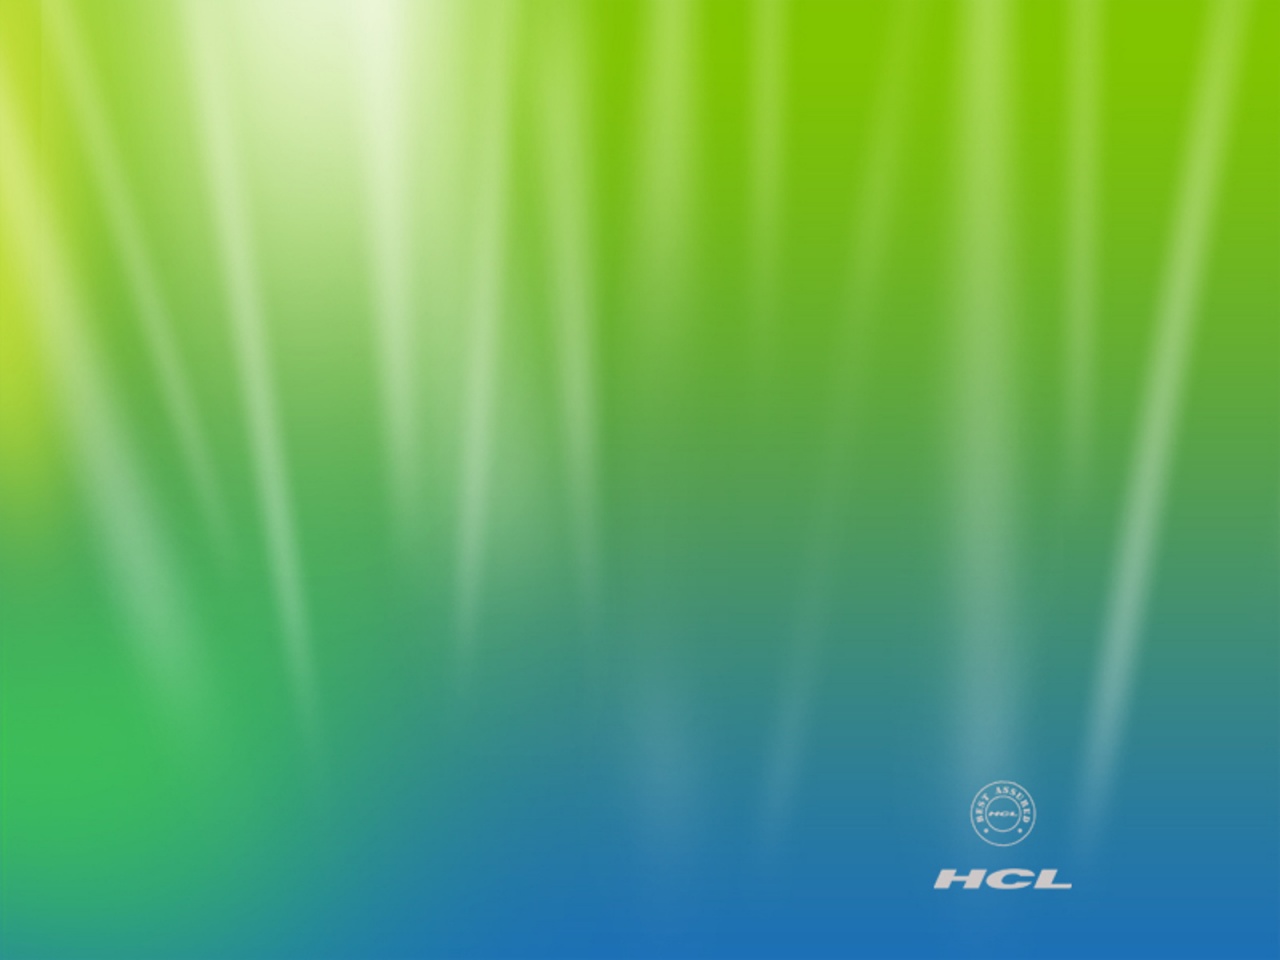 HCL 3 Wallpapers